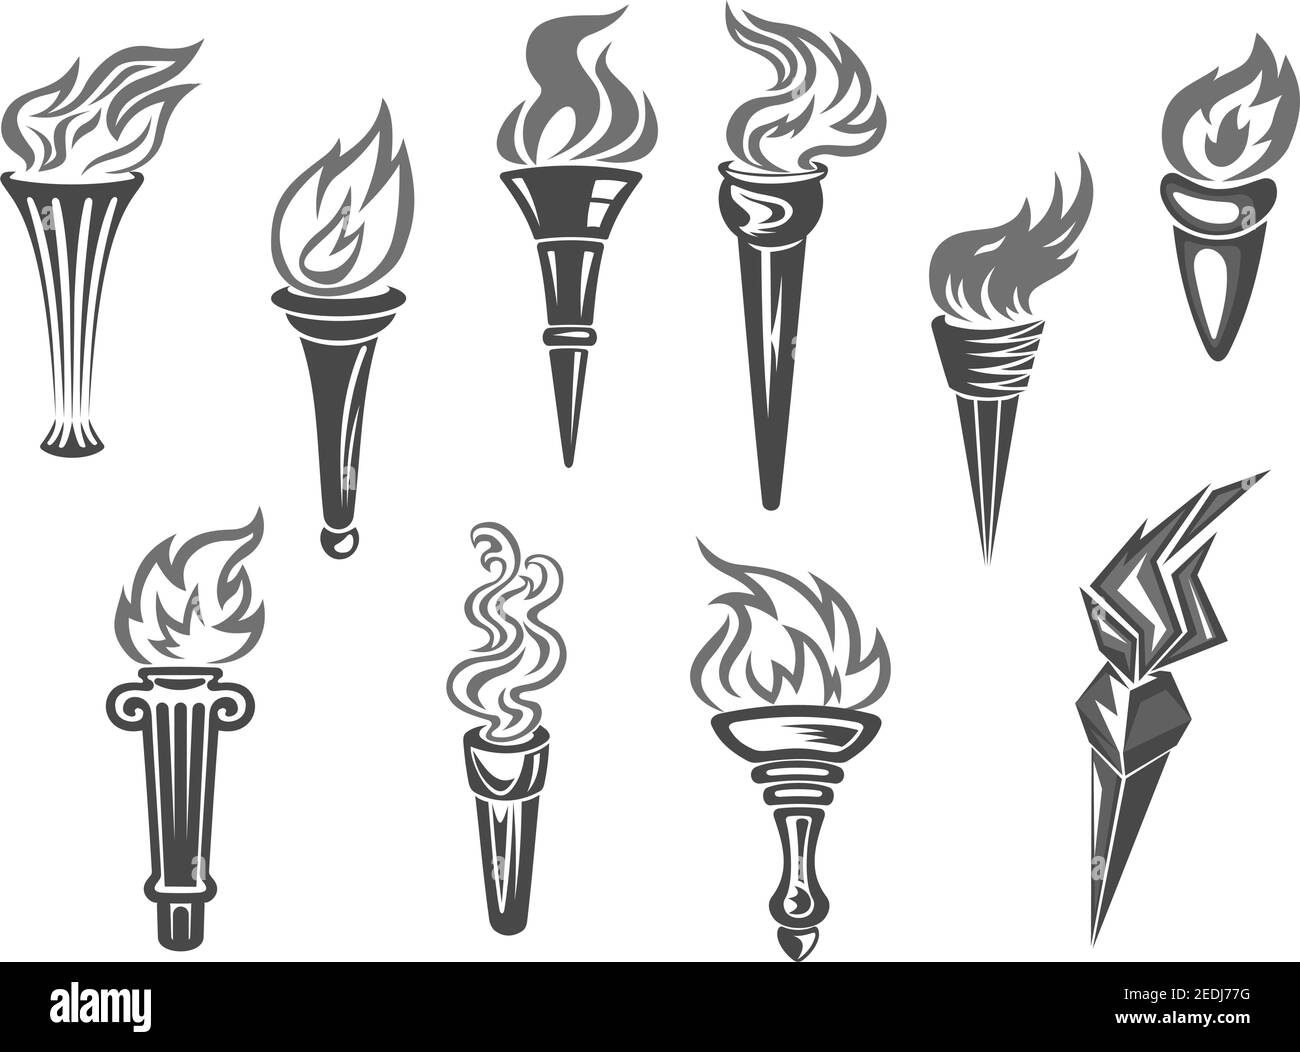 Olympic flame or fire torch icons. Vector set of isolated burning sport or contest torches flames. Symbols of relay race, competition victory, champio Stock Vector